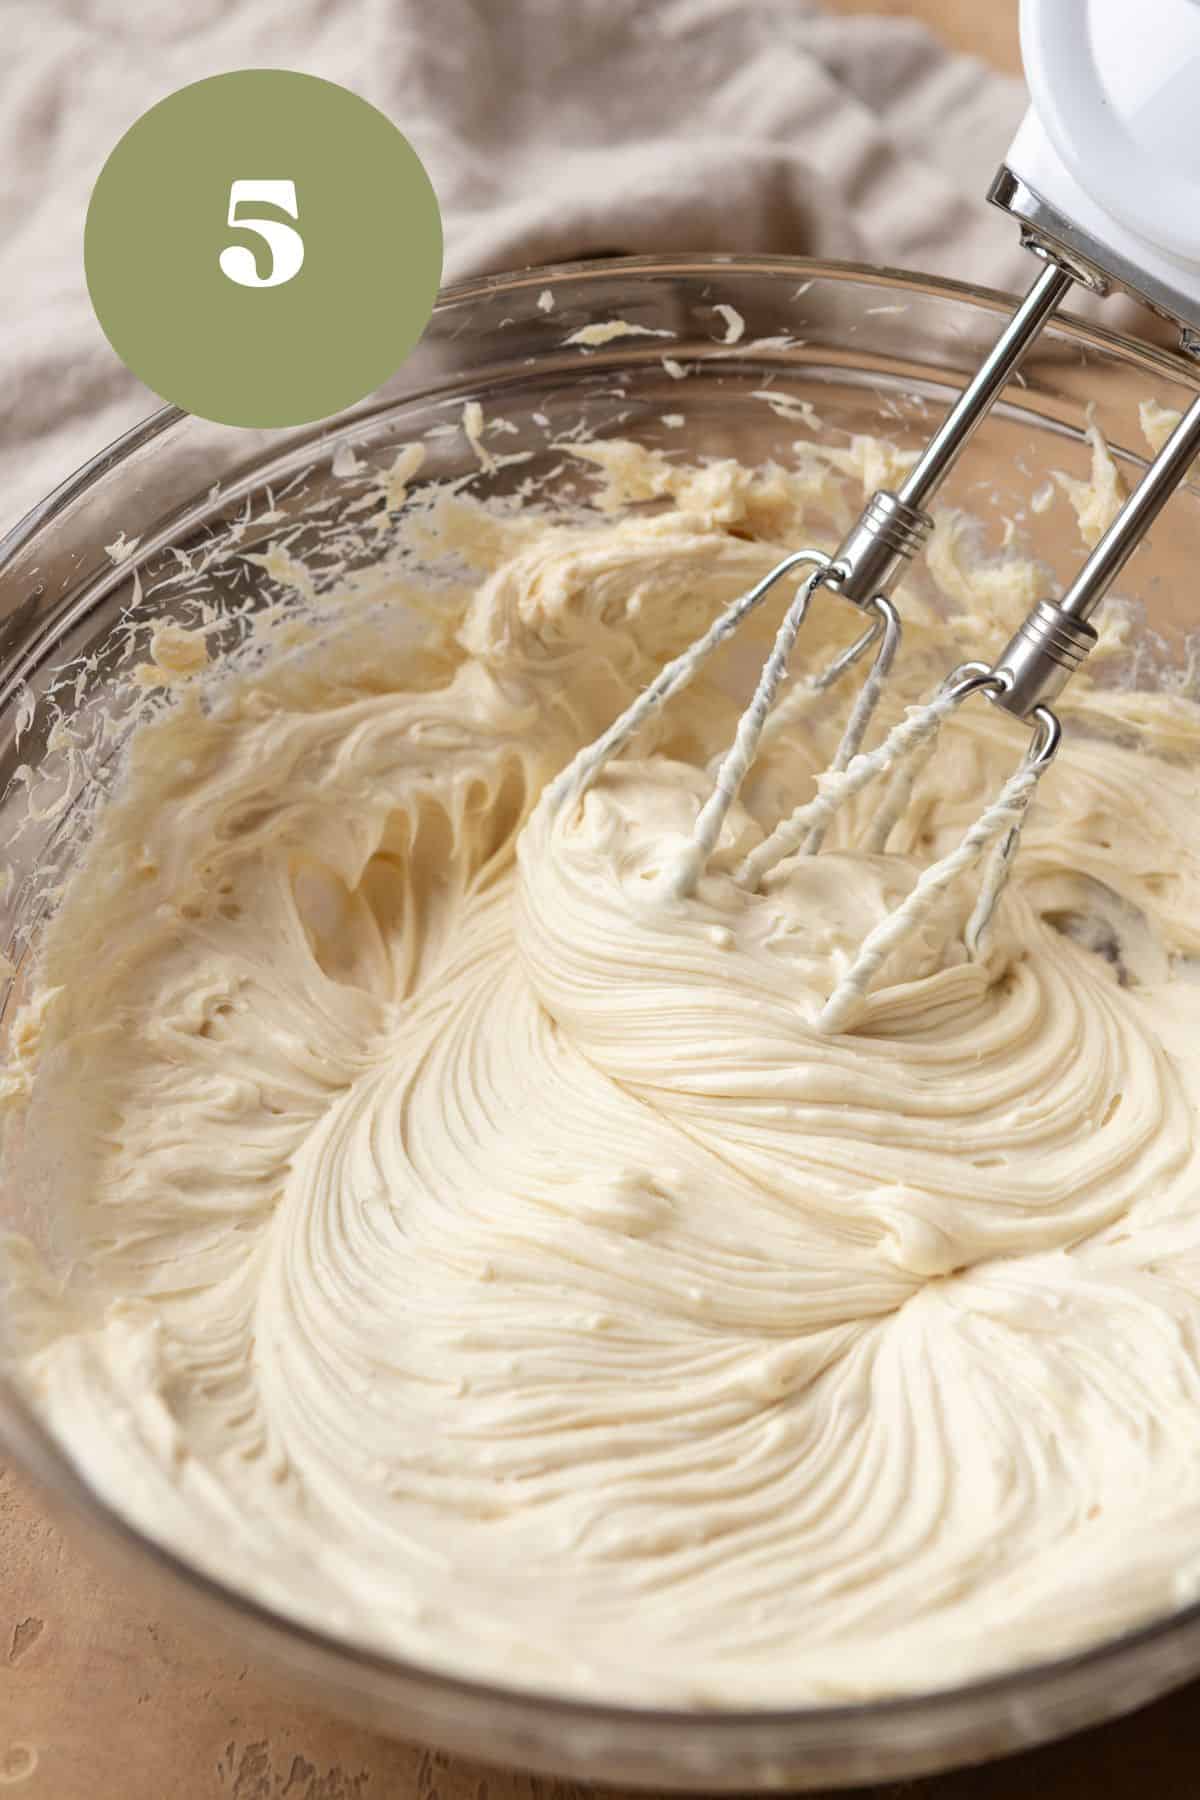 Cream cheese being beat in a large bowl.